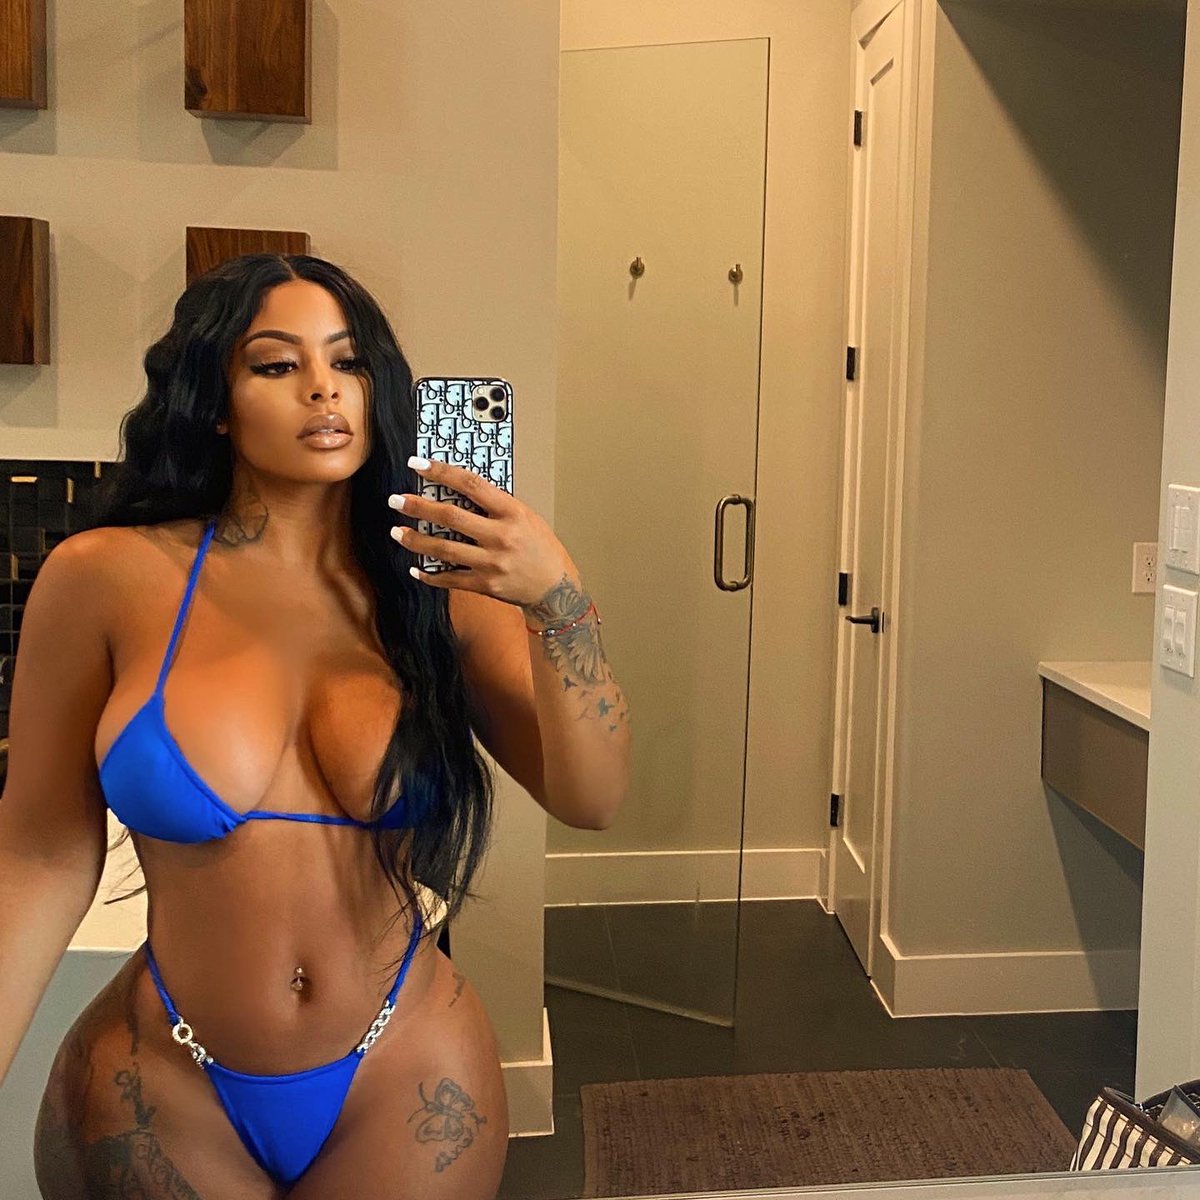 Fans alexis skyy only Alexis Skyy